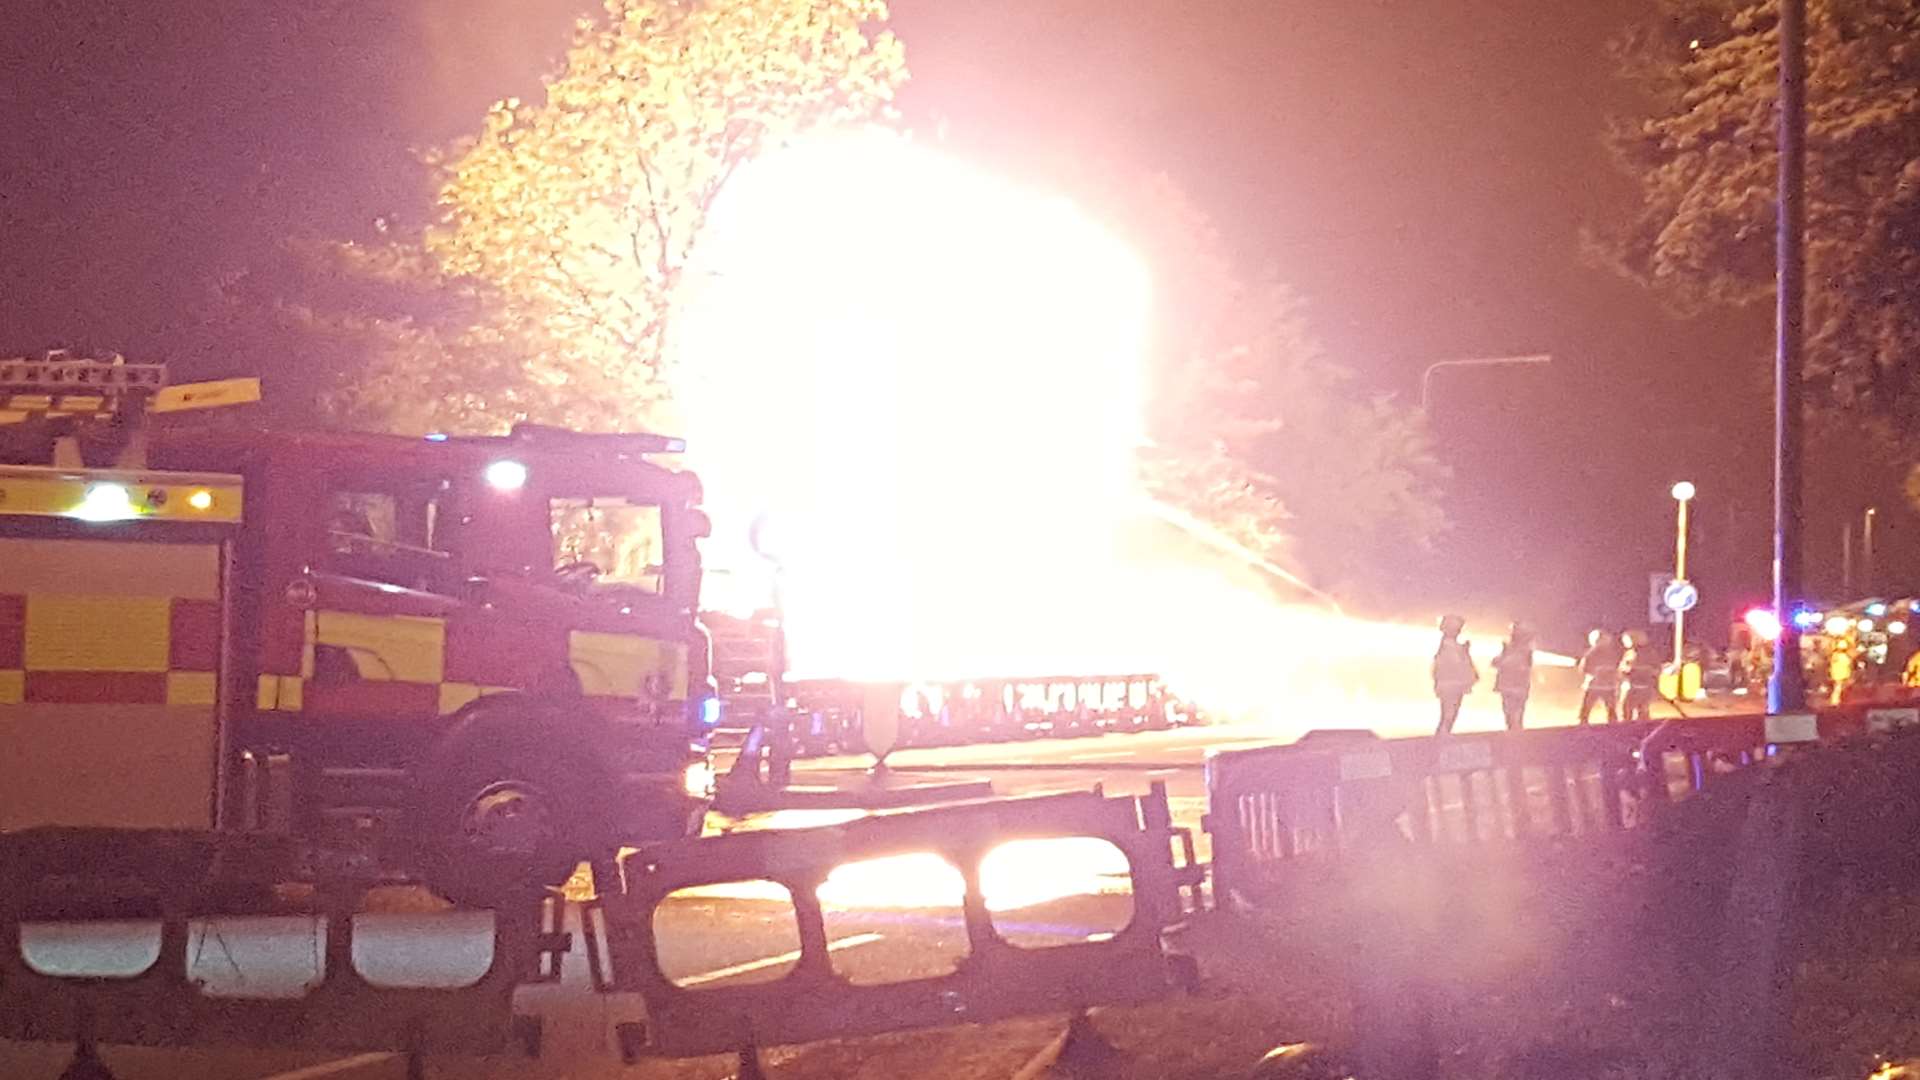 Gas works were being carried out in the area